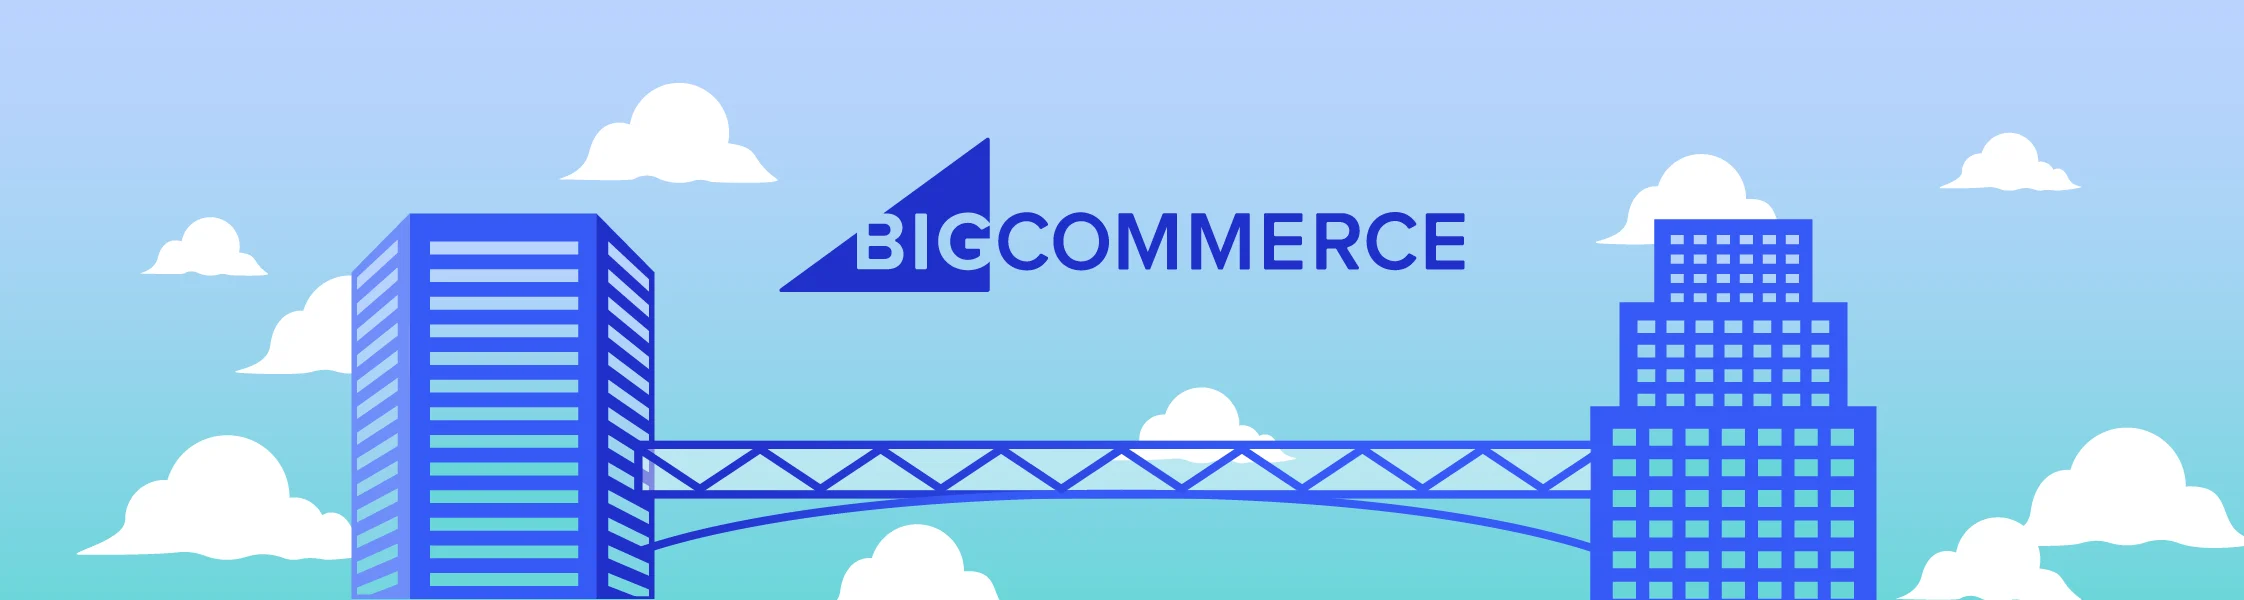 https://cms-wp.bigcommerce.com/wp-content/uploads/2022/07/4615CD_B2B-Buying-Process_May-2022_Header.png